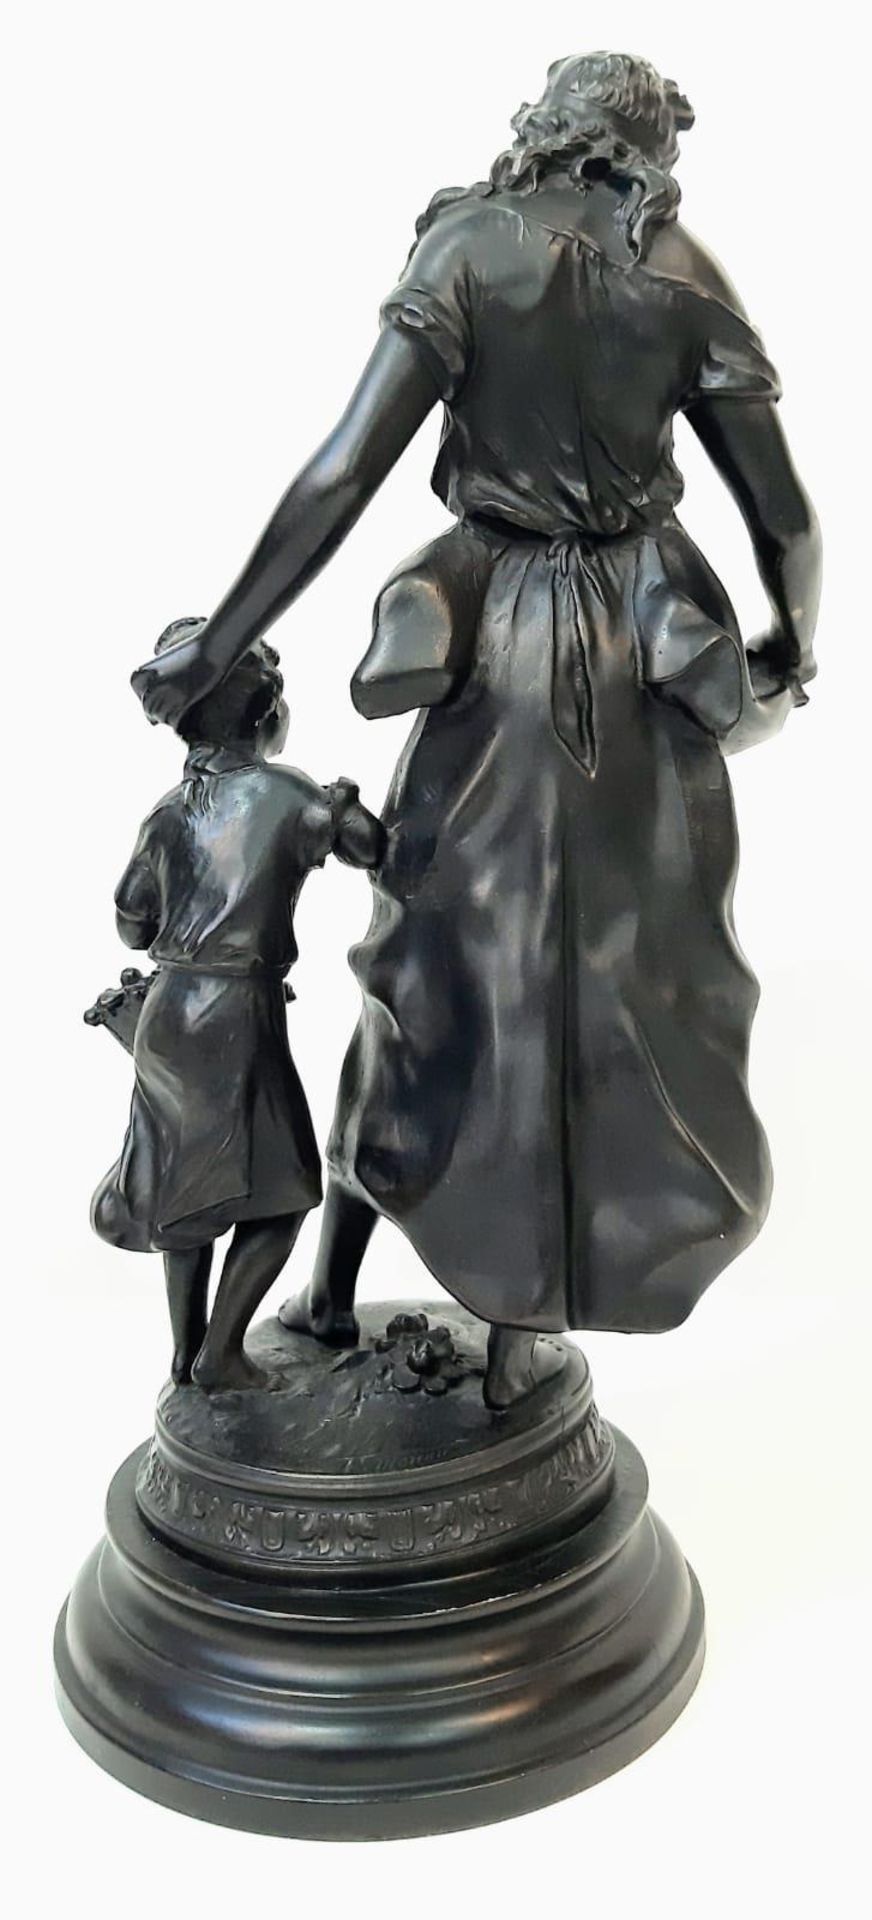 Charming, large statue depicting a Mother and a Daughter out collecting flowers. Standing 54cm tall, - Image 3 of 8